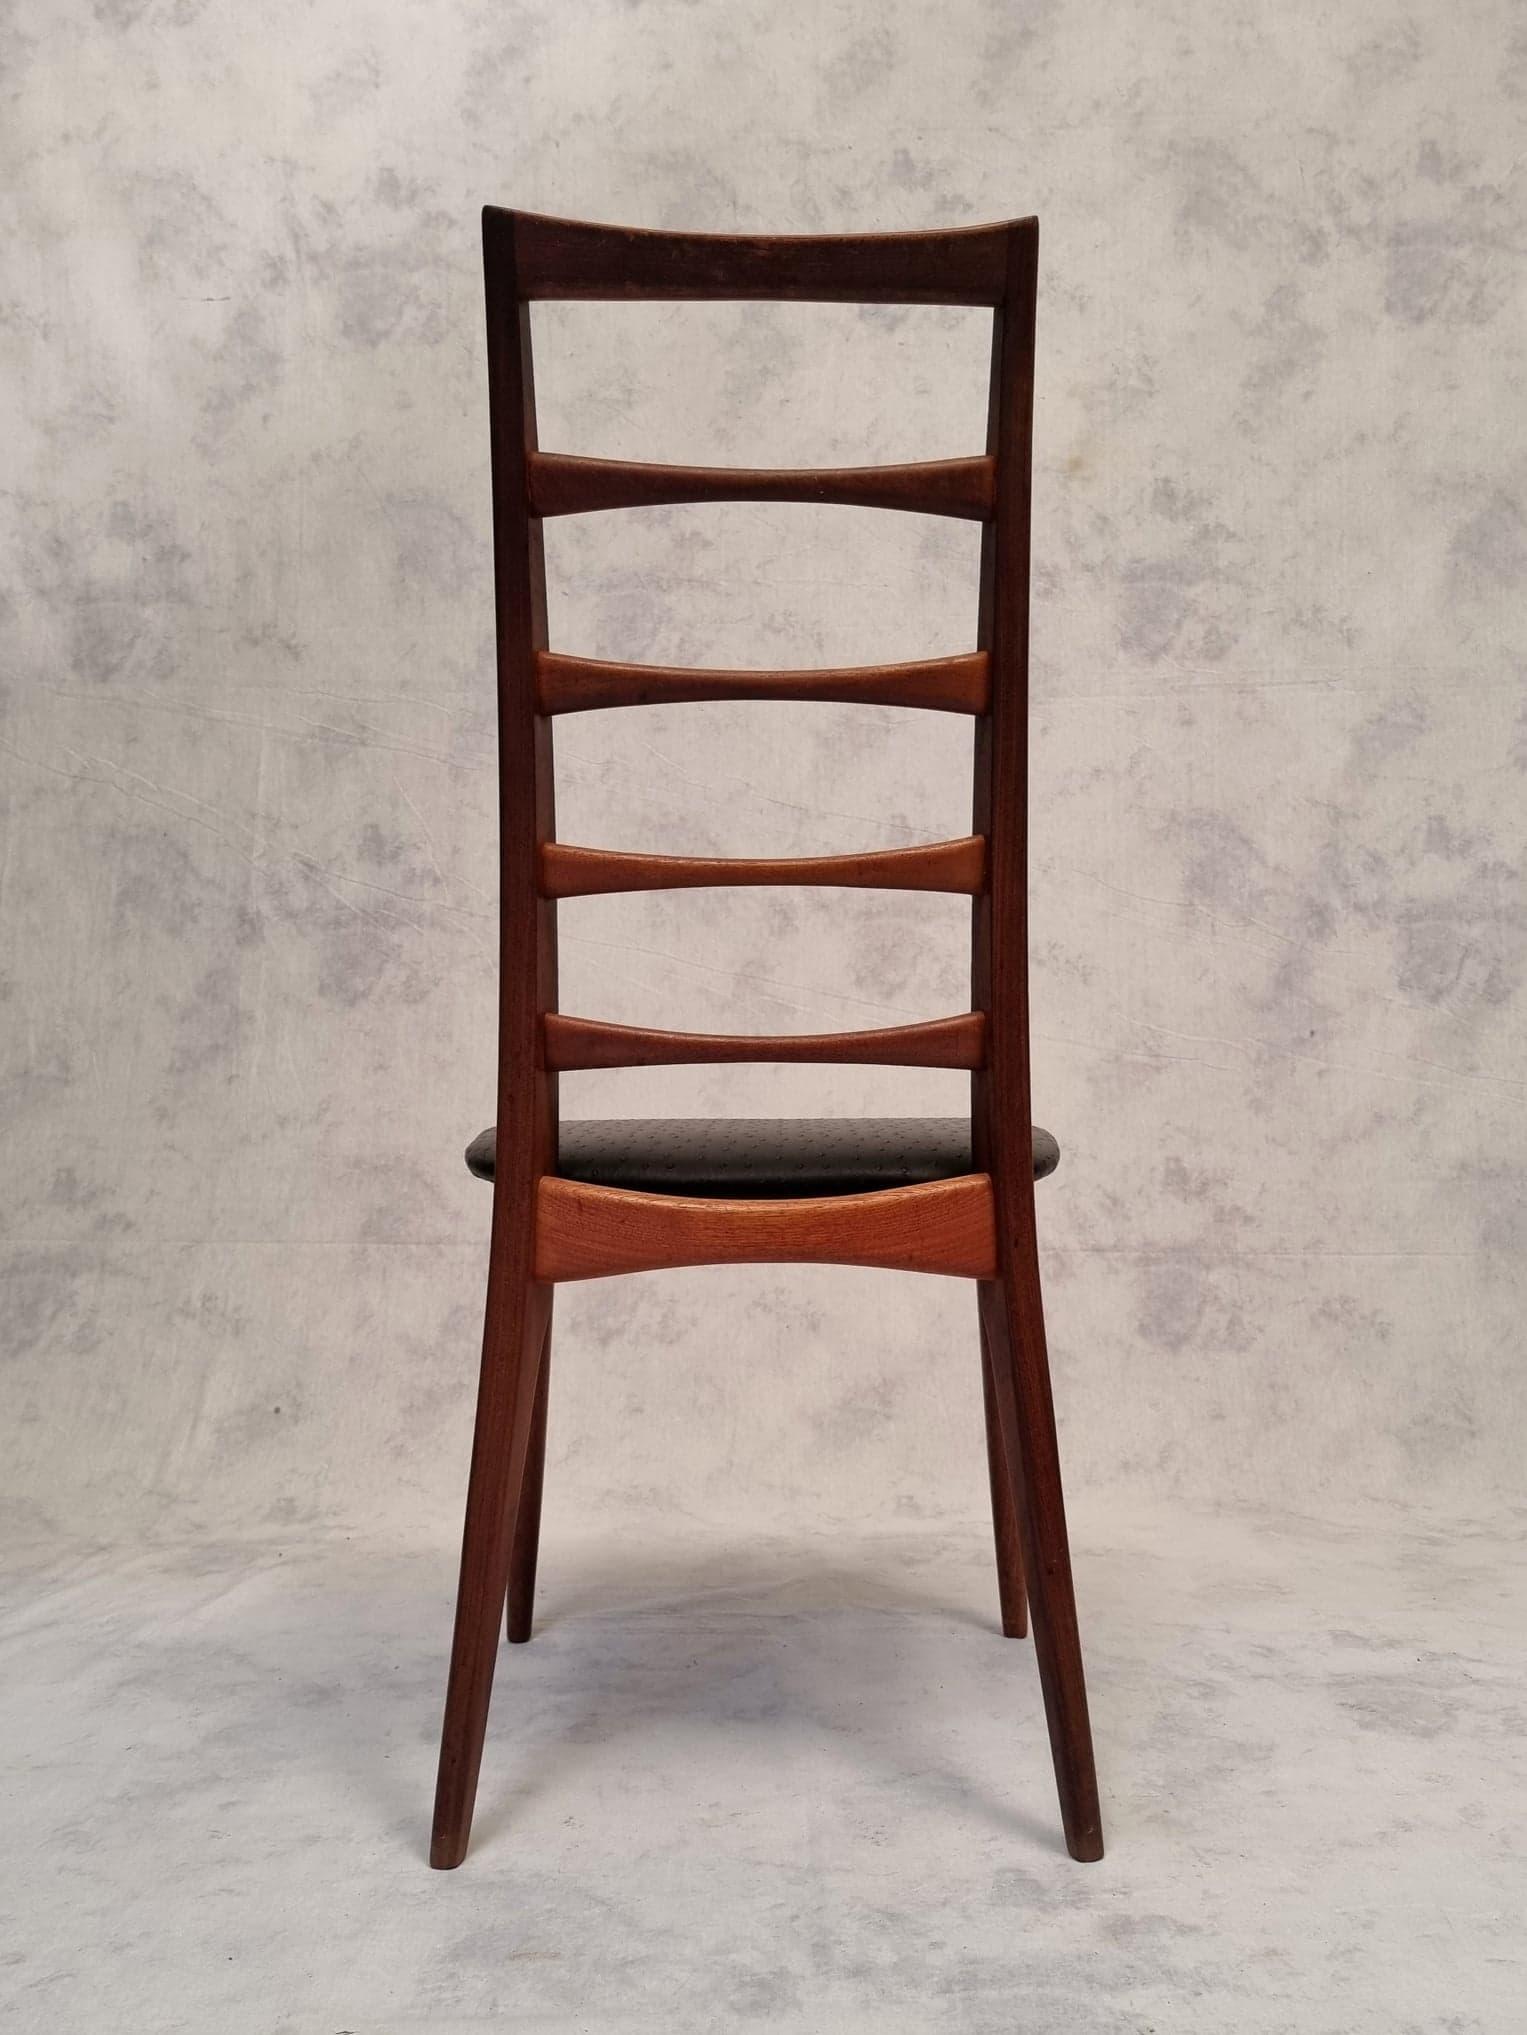 Serie of Four Chairs 